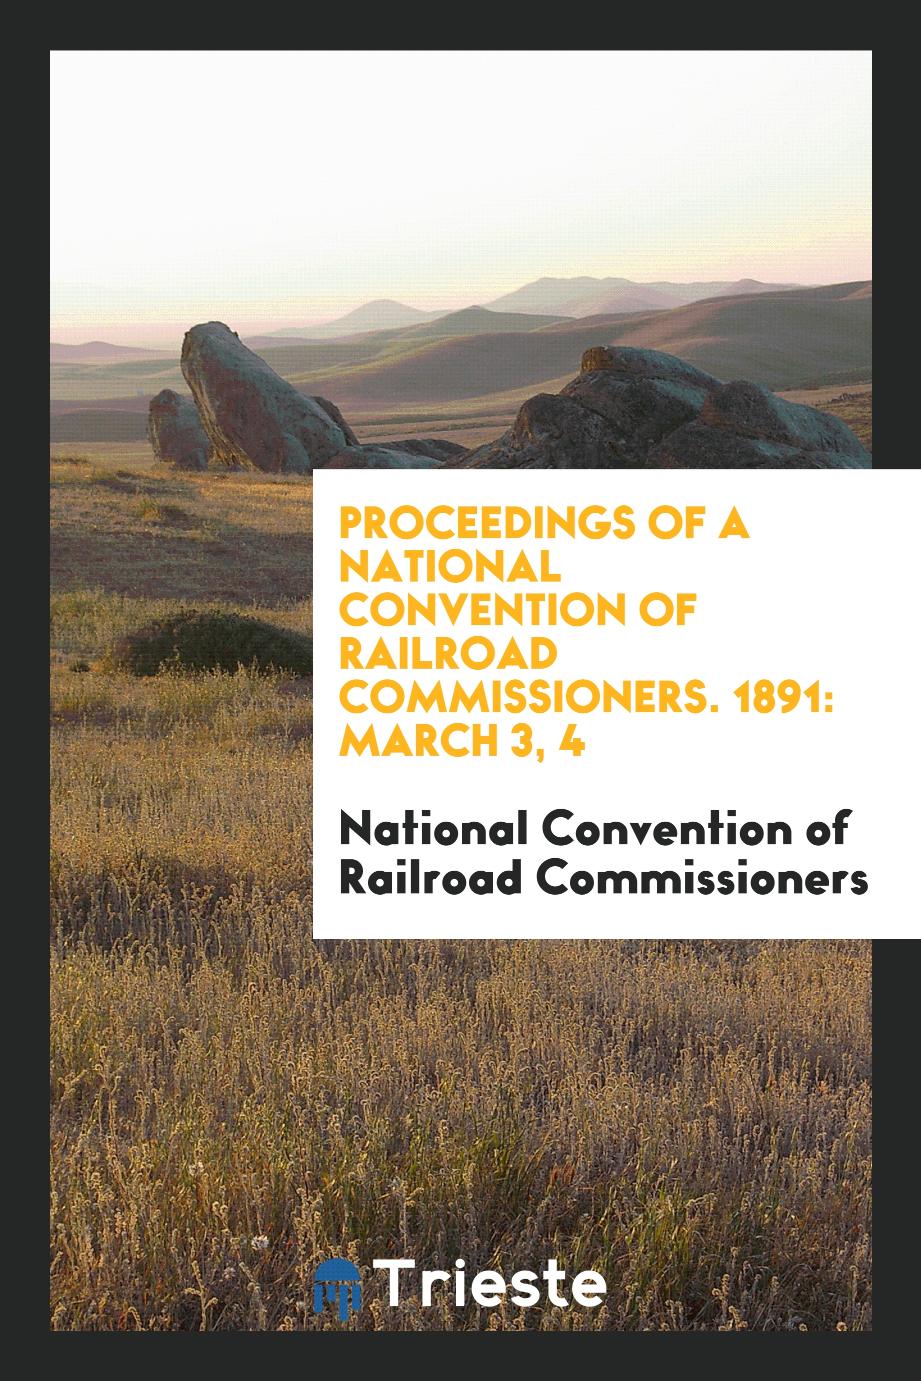 Proceedings of a National Convention of Railroad Commissioners. 1891: March 3, 4